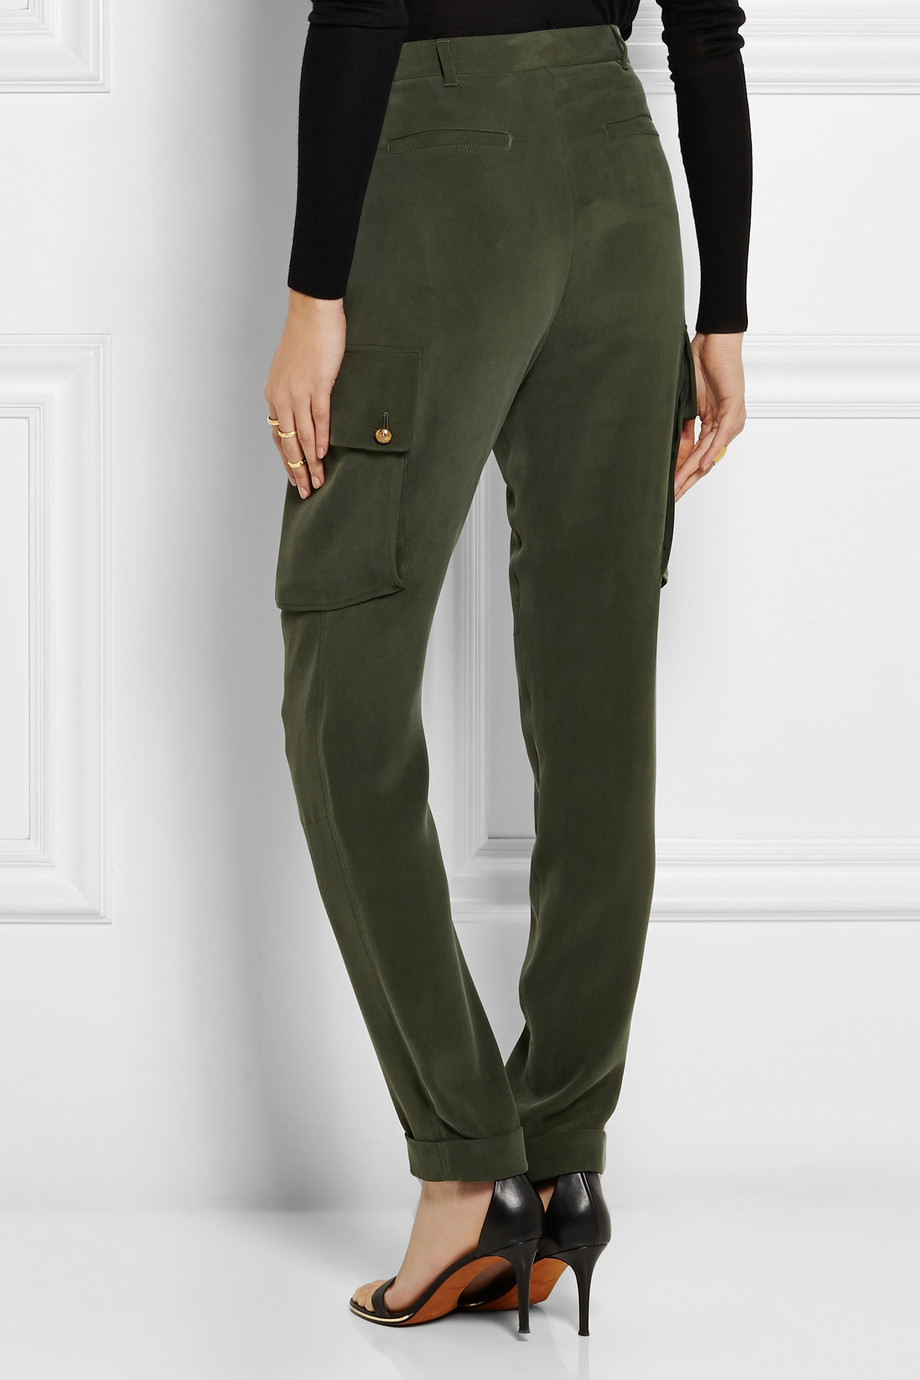 JOSEPH Commando Washed Silk-Crepe Cargo Pants in Green - Lyst